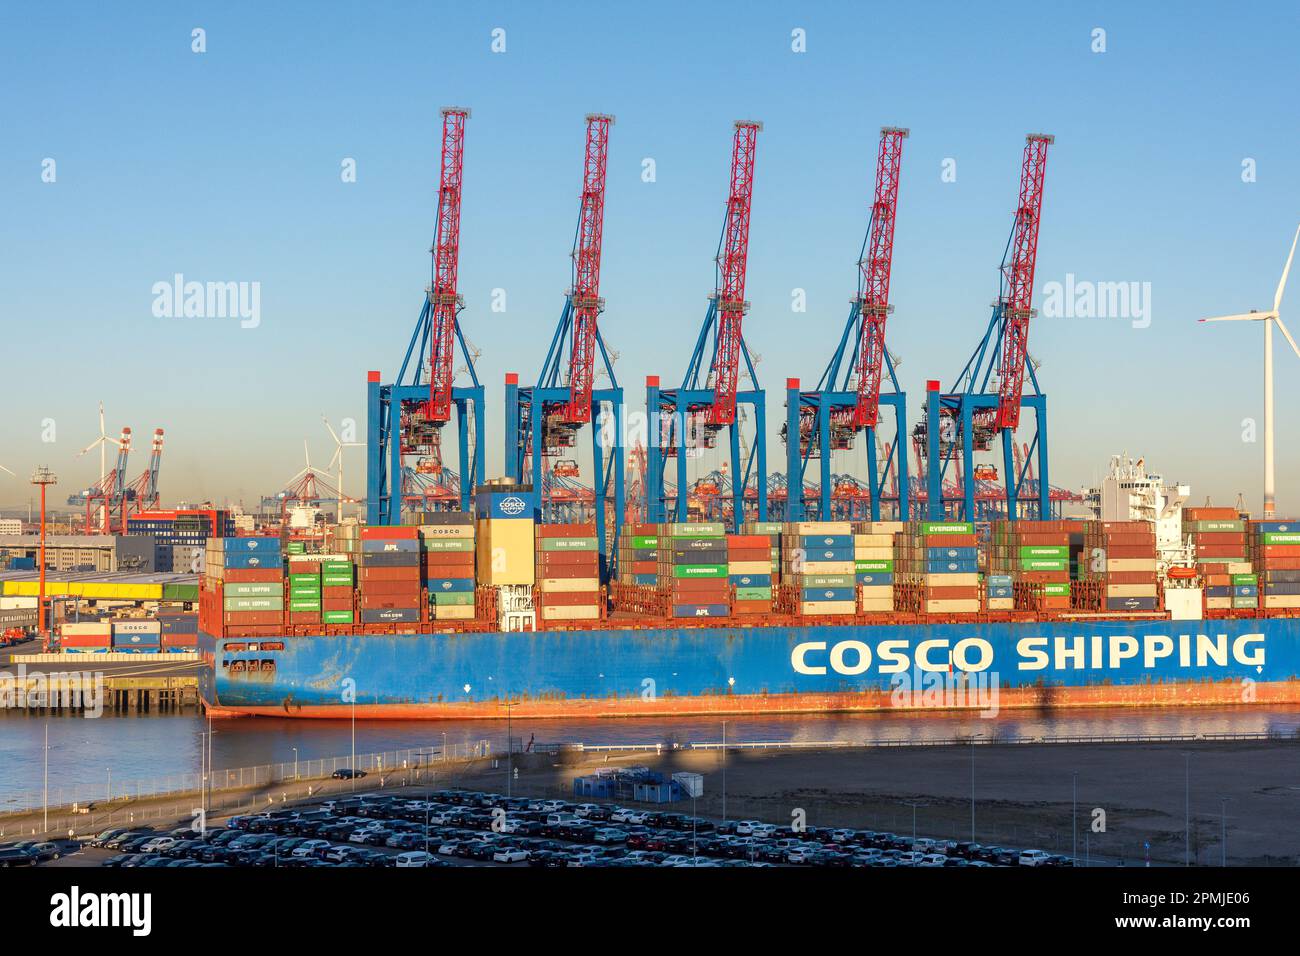 Cosco Shipping container ship in container port, Port of Hamburg, Hamburg, Federal Republic of Germany Stock Photo